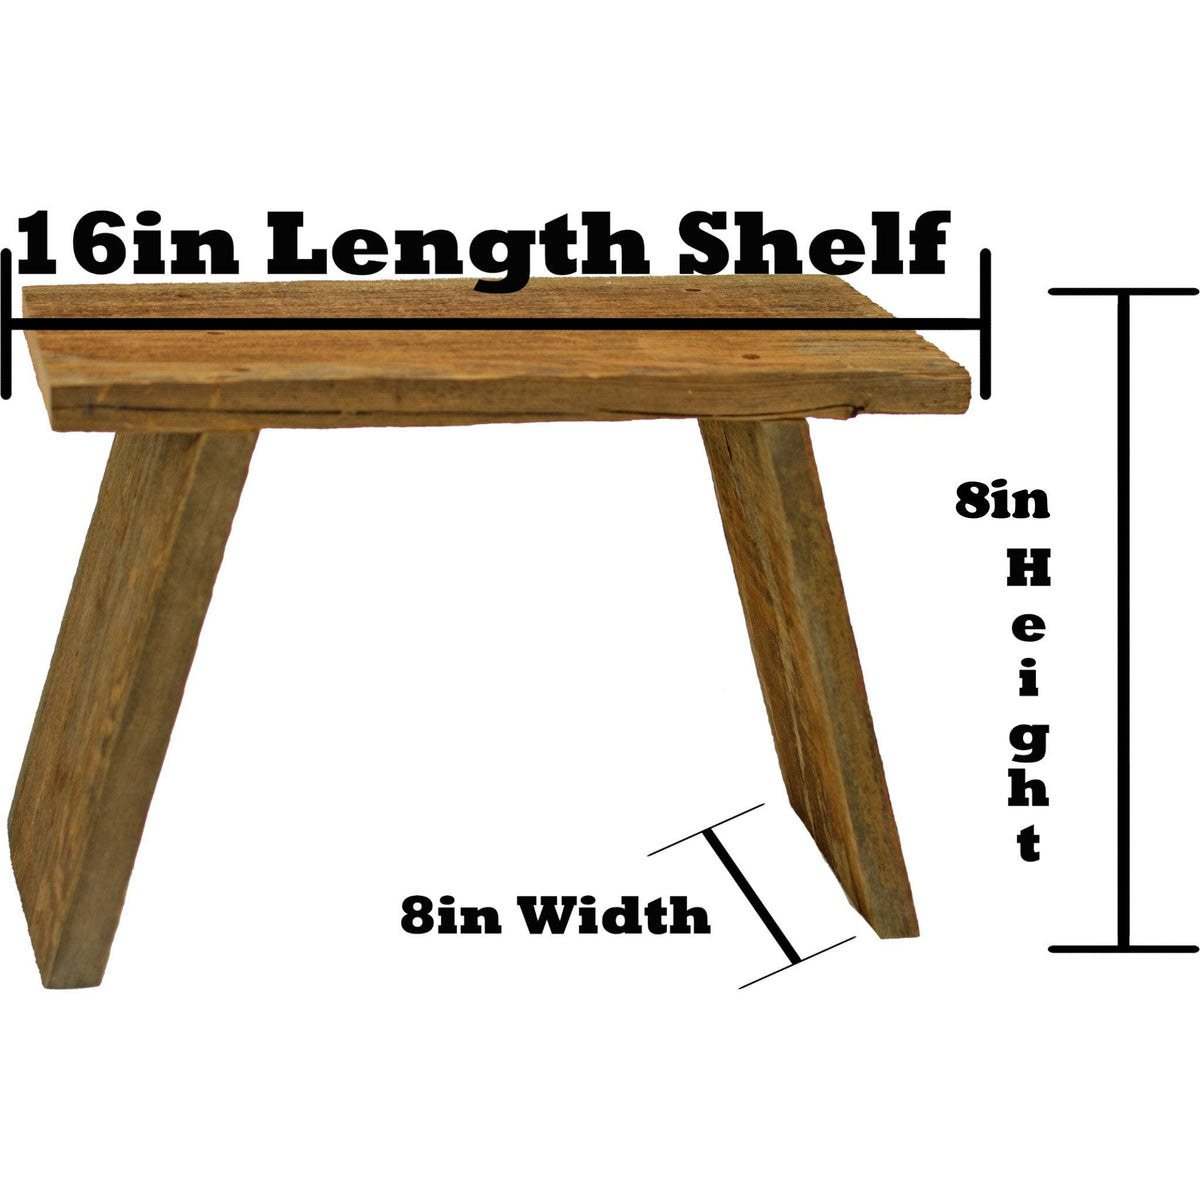 Dimensions of Lee Display's Rustic Redwood Build-Up End Table